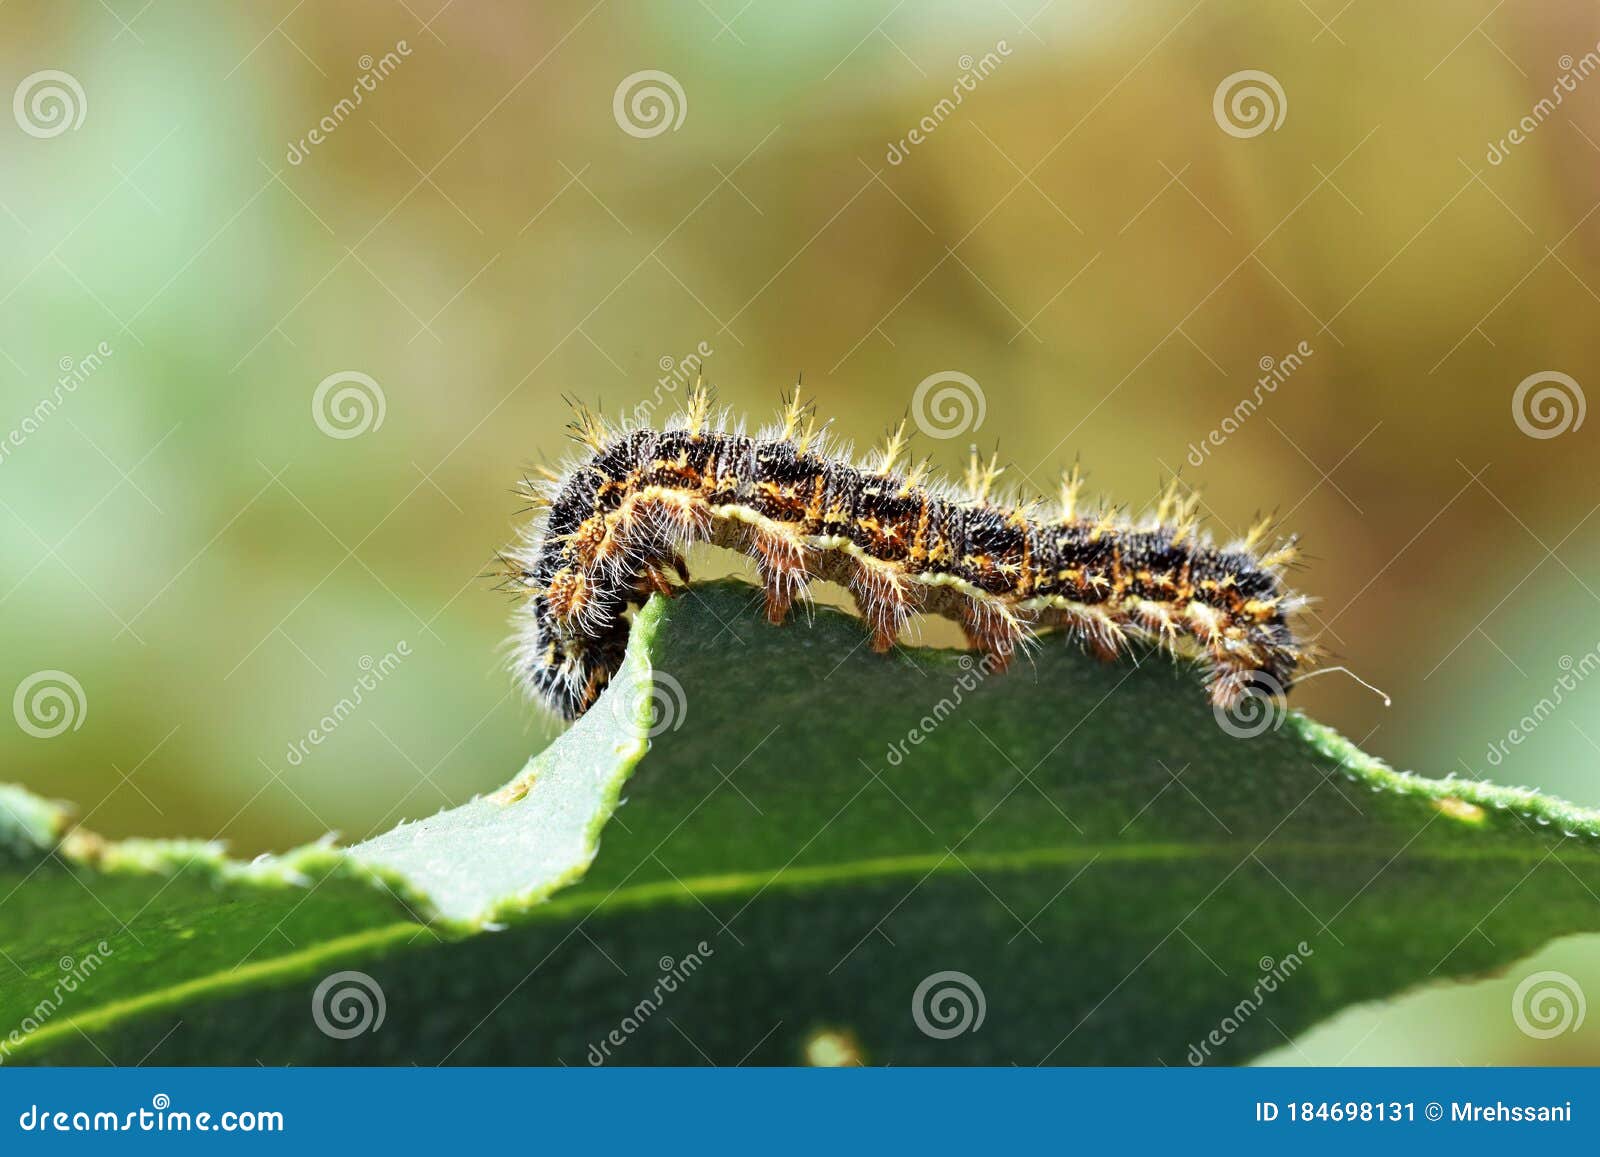 the painted lady butterfly caterpillar  , vanessa cardui larva